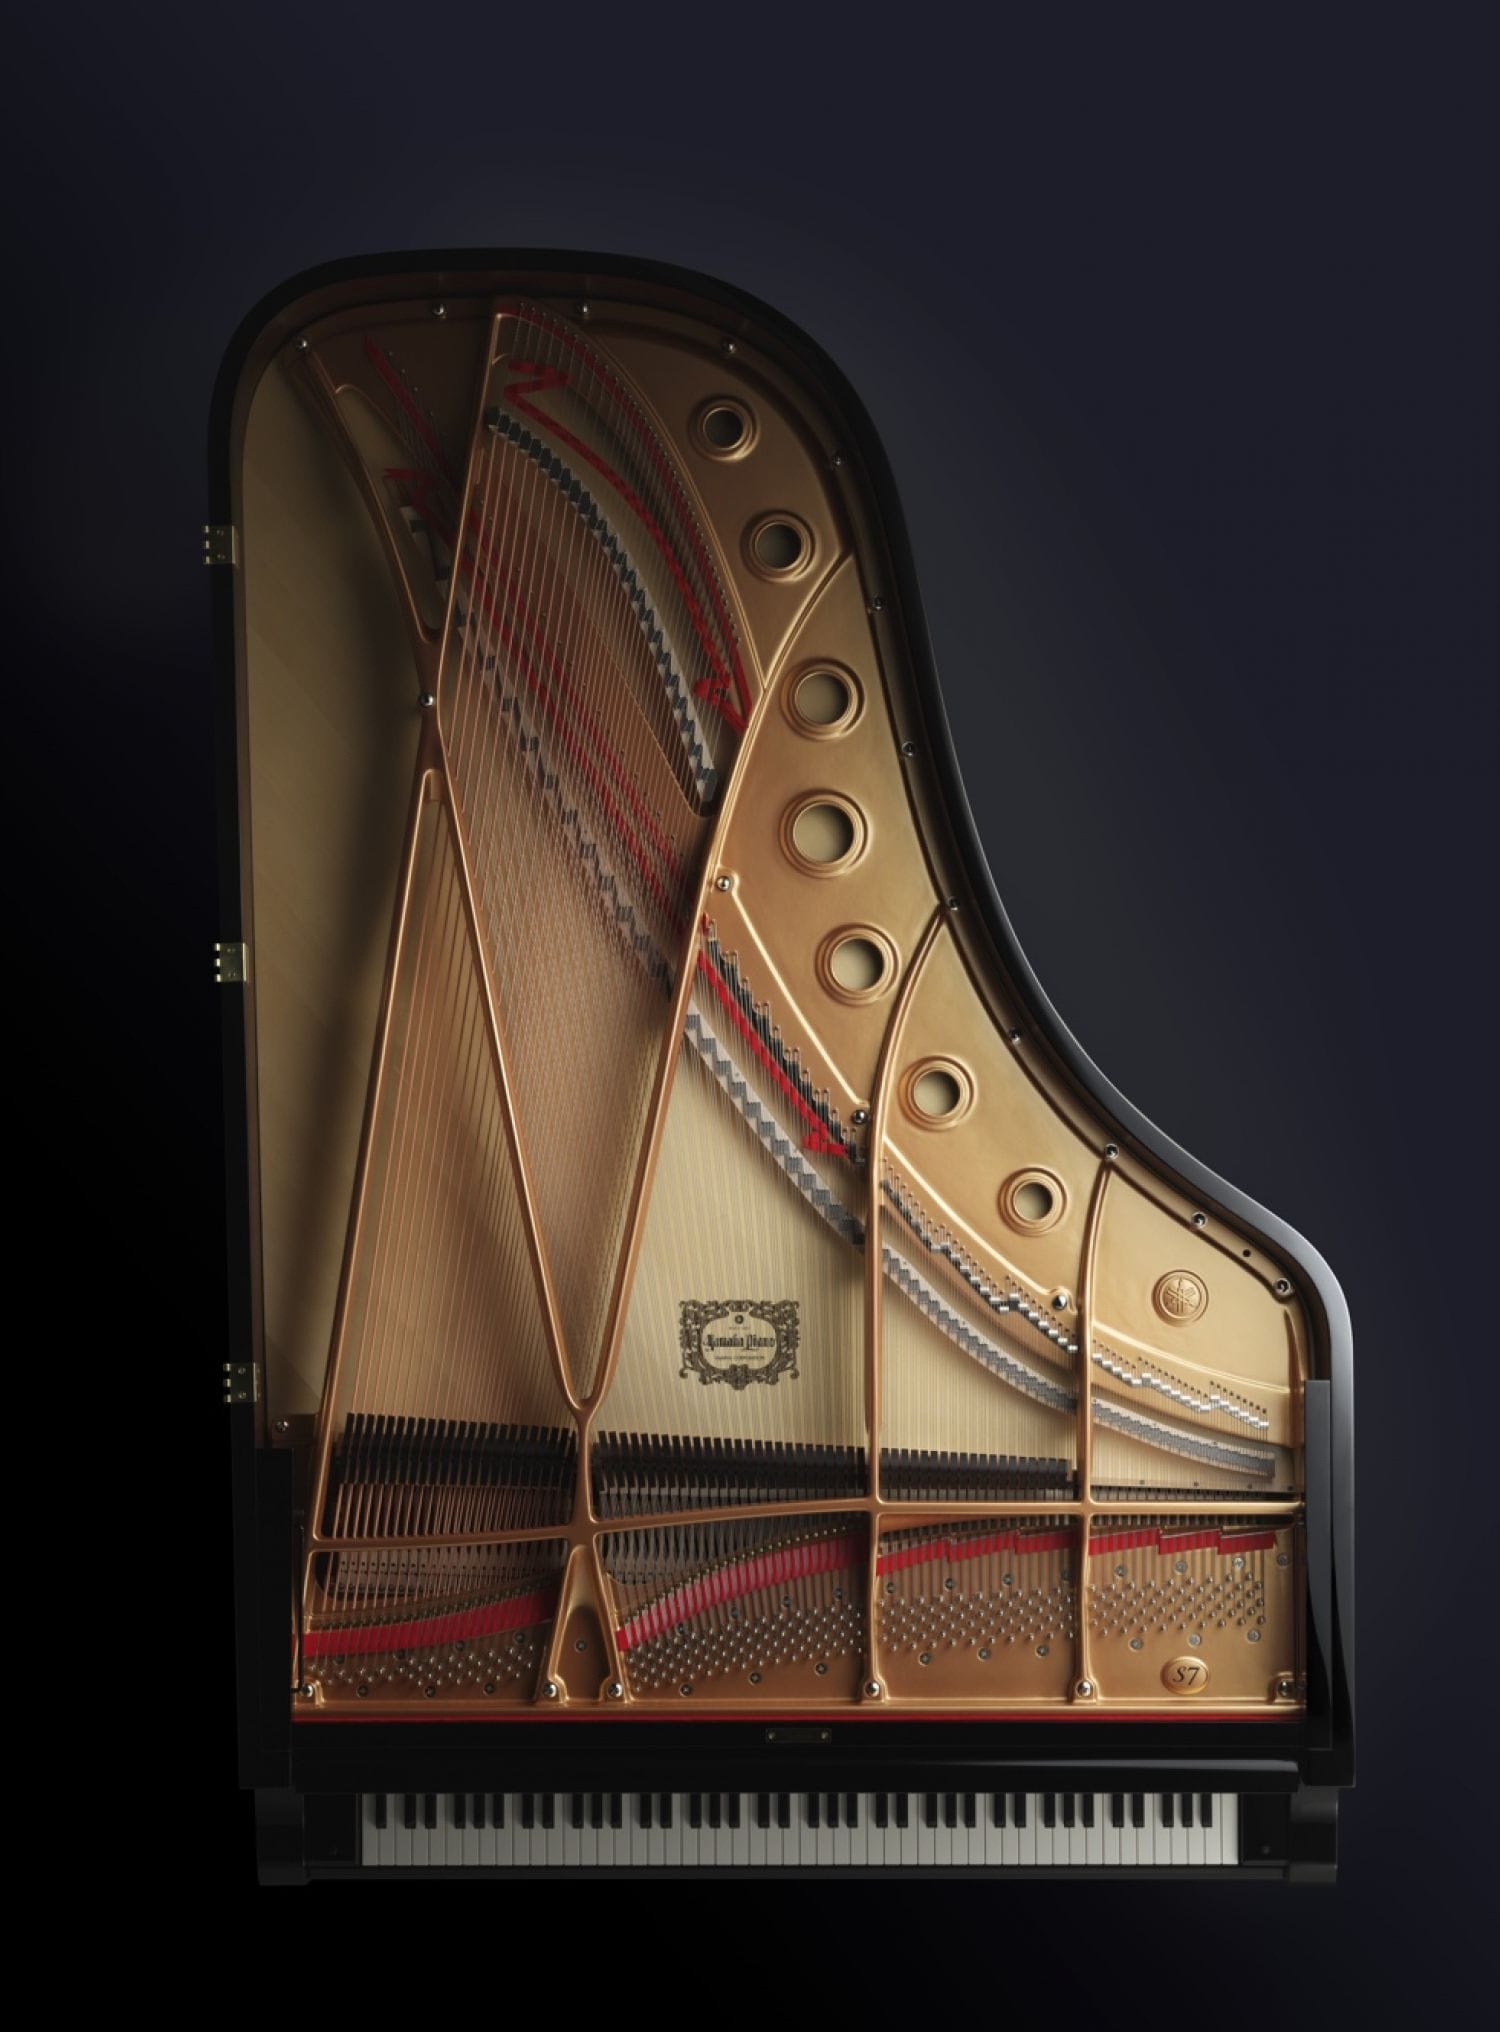 A Yamaha grand piano with lid removed and viewed from above to see entire interior.